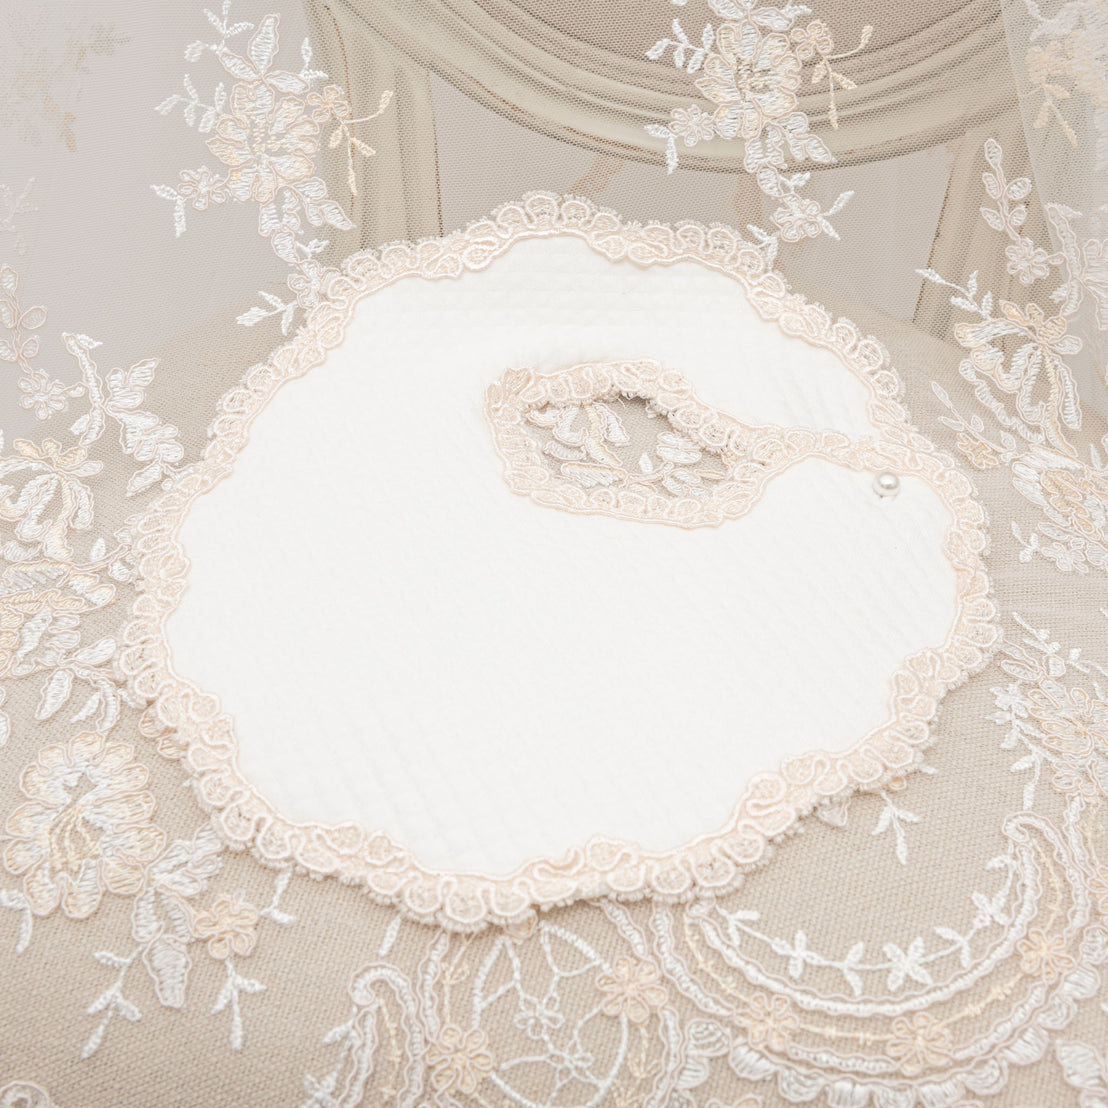 An elegant Kristina Bib placed on a vintage-inspired white embroidered lace fabric background, with floral patterns and a scalloped edge visible, creating a delicate and refined texture contrast.